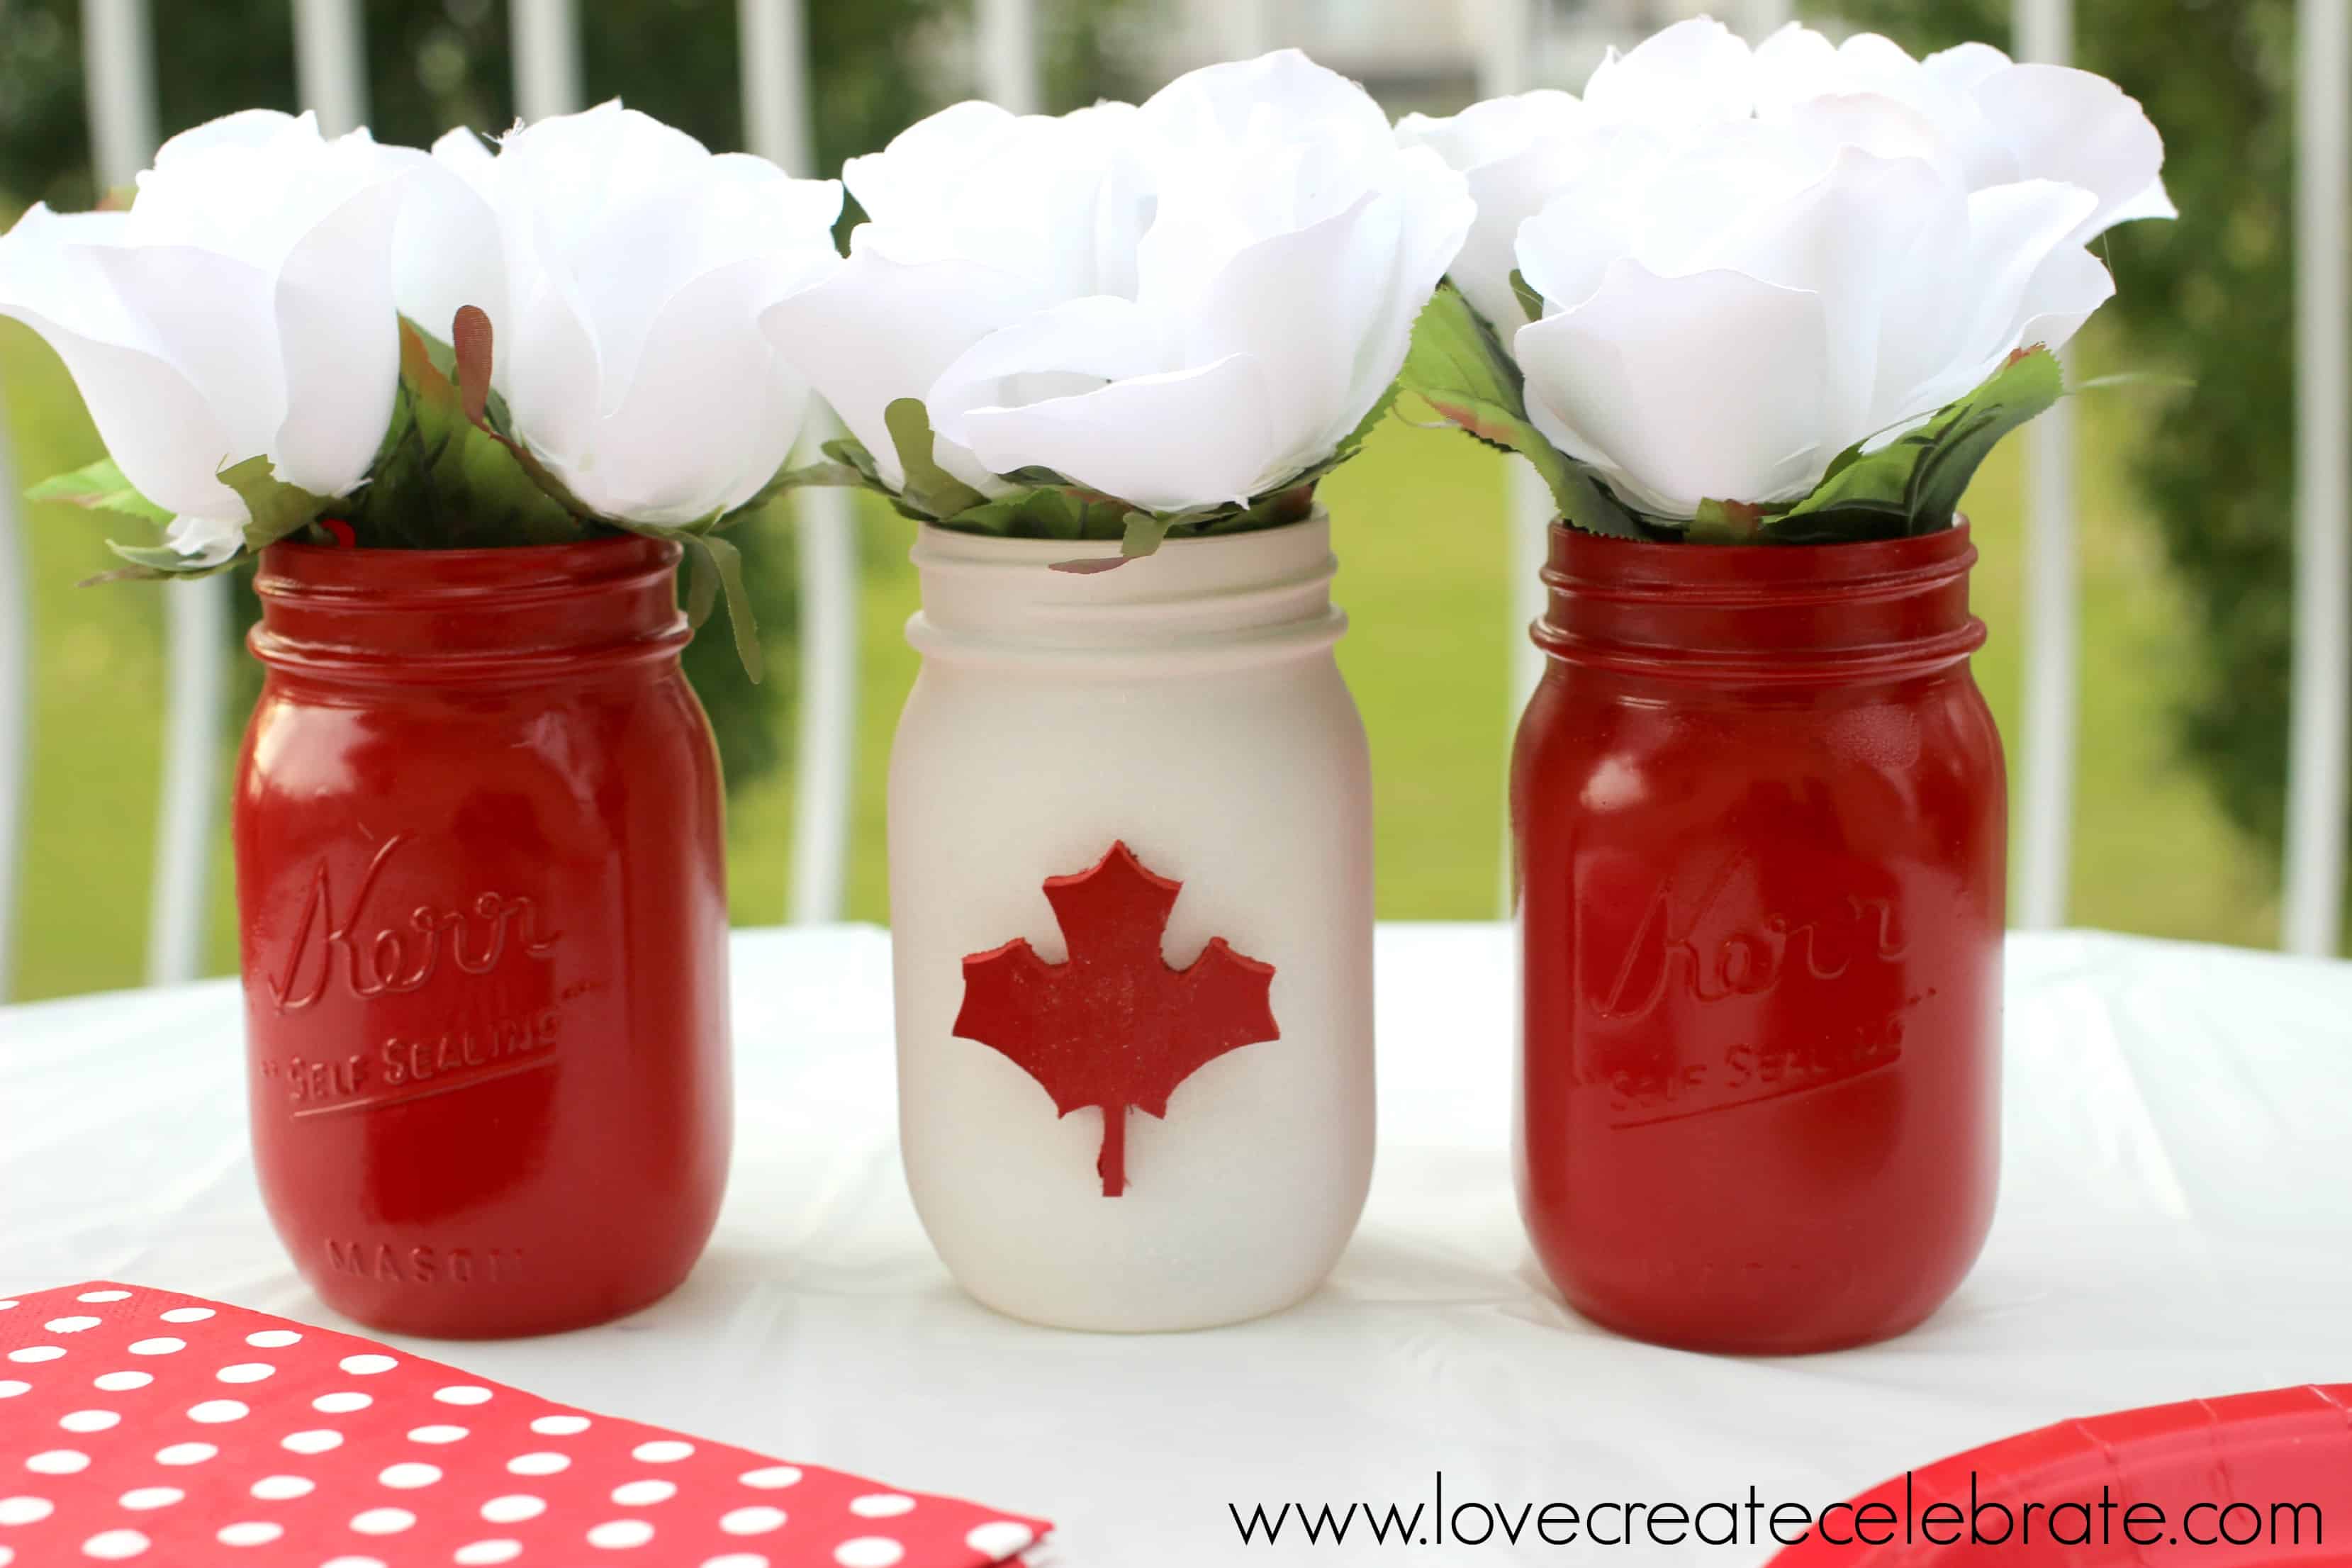 Mason jars painted red, white and red with a red maple leaf on the white painted jar 